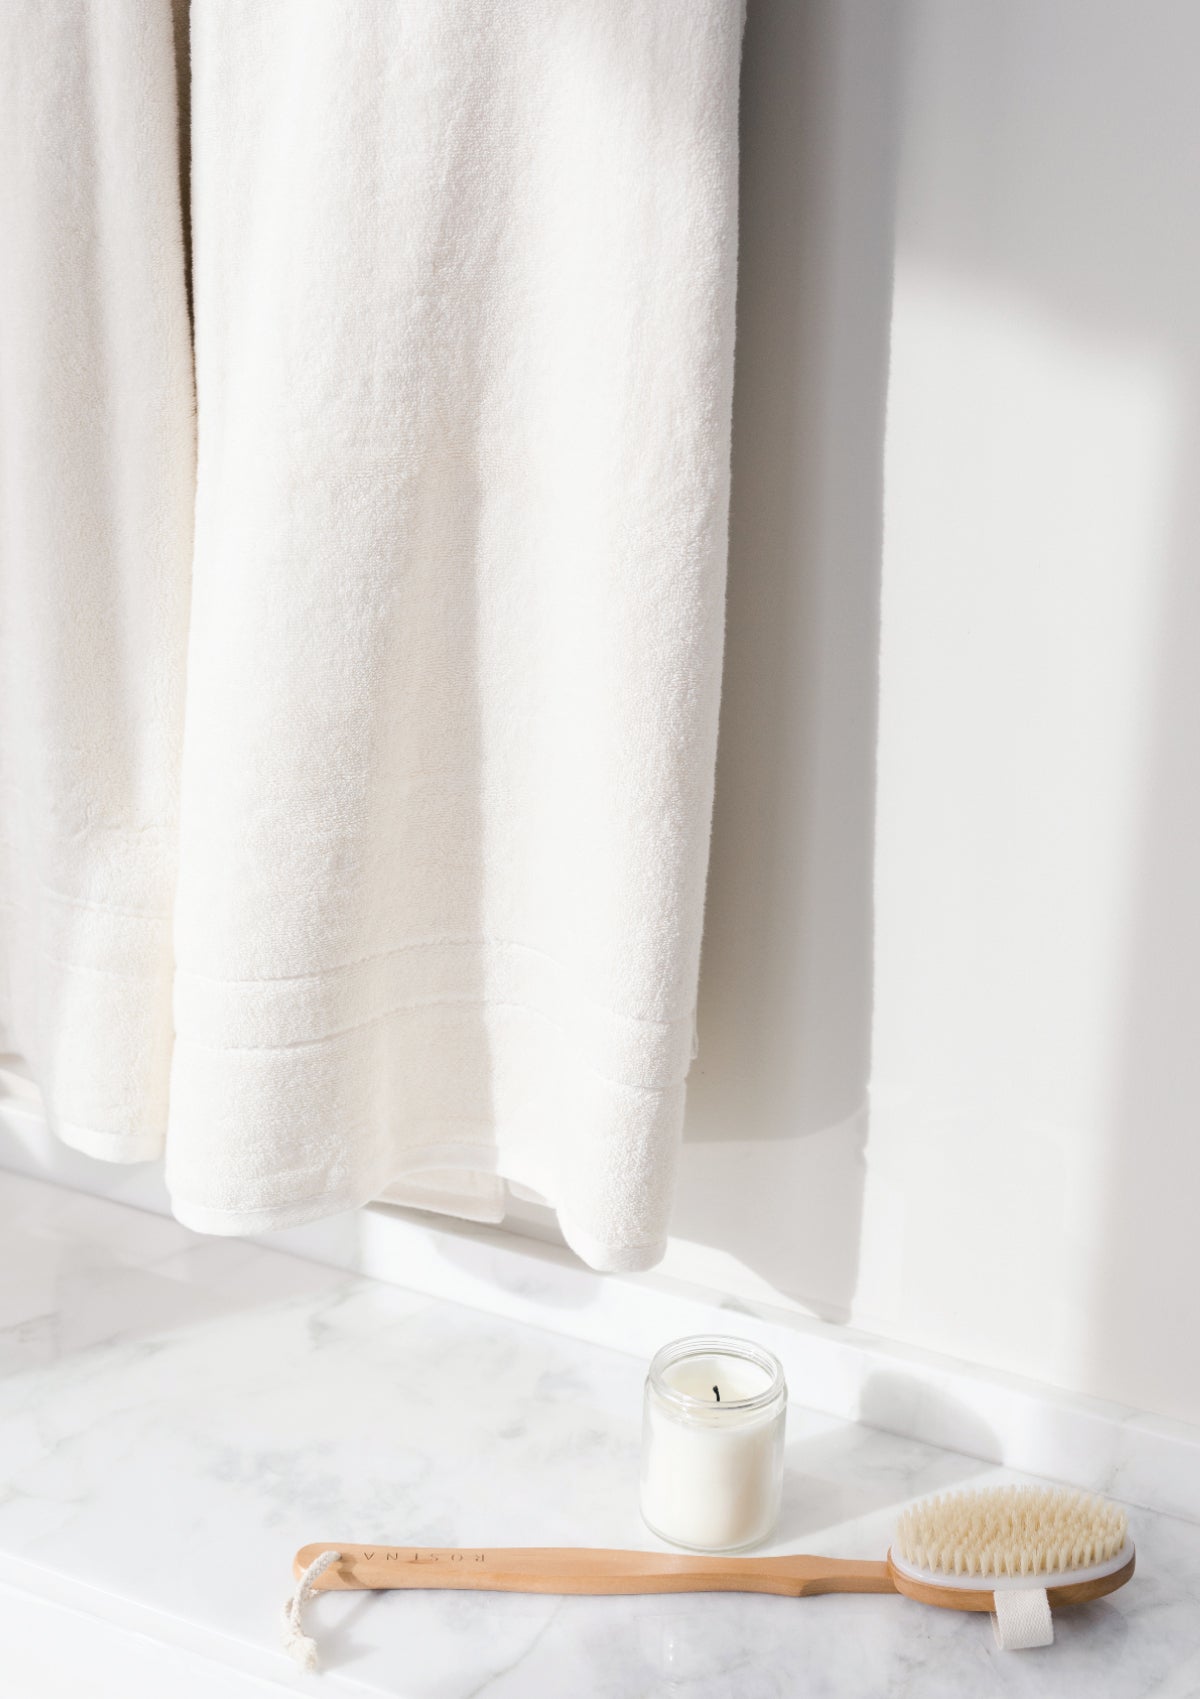 Premium Plush Bath Towels in the color Creme. Photo of Premium Plush Bath Towels taken as a close up of the towel. The photo was taken in a bathroom. There is a scrub brush and a candle on the bathroom floor. 